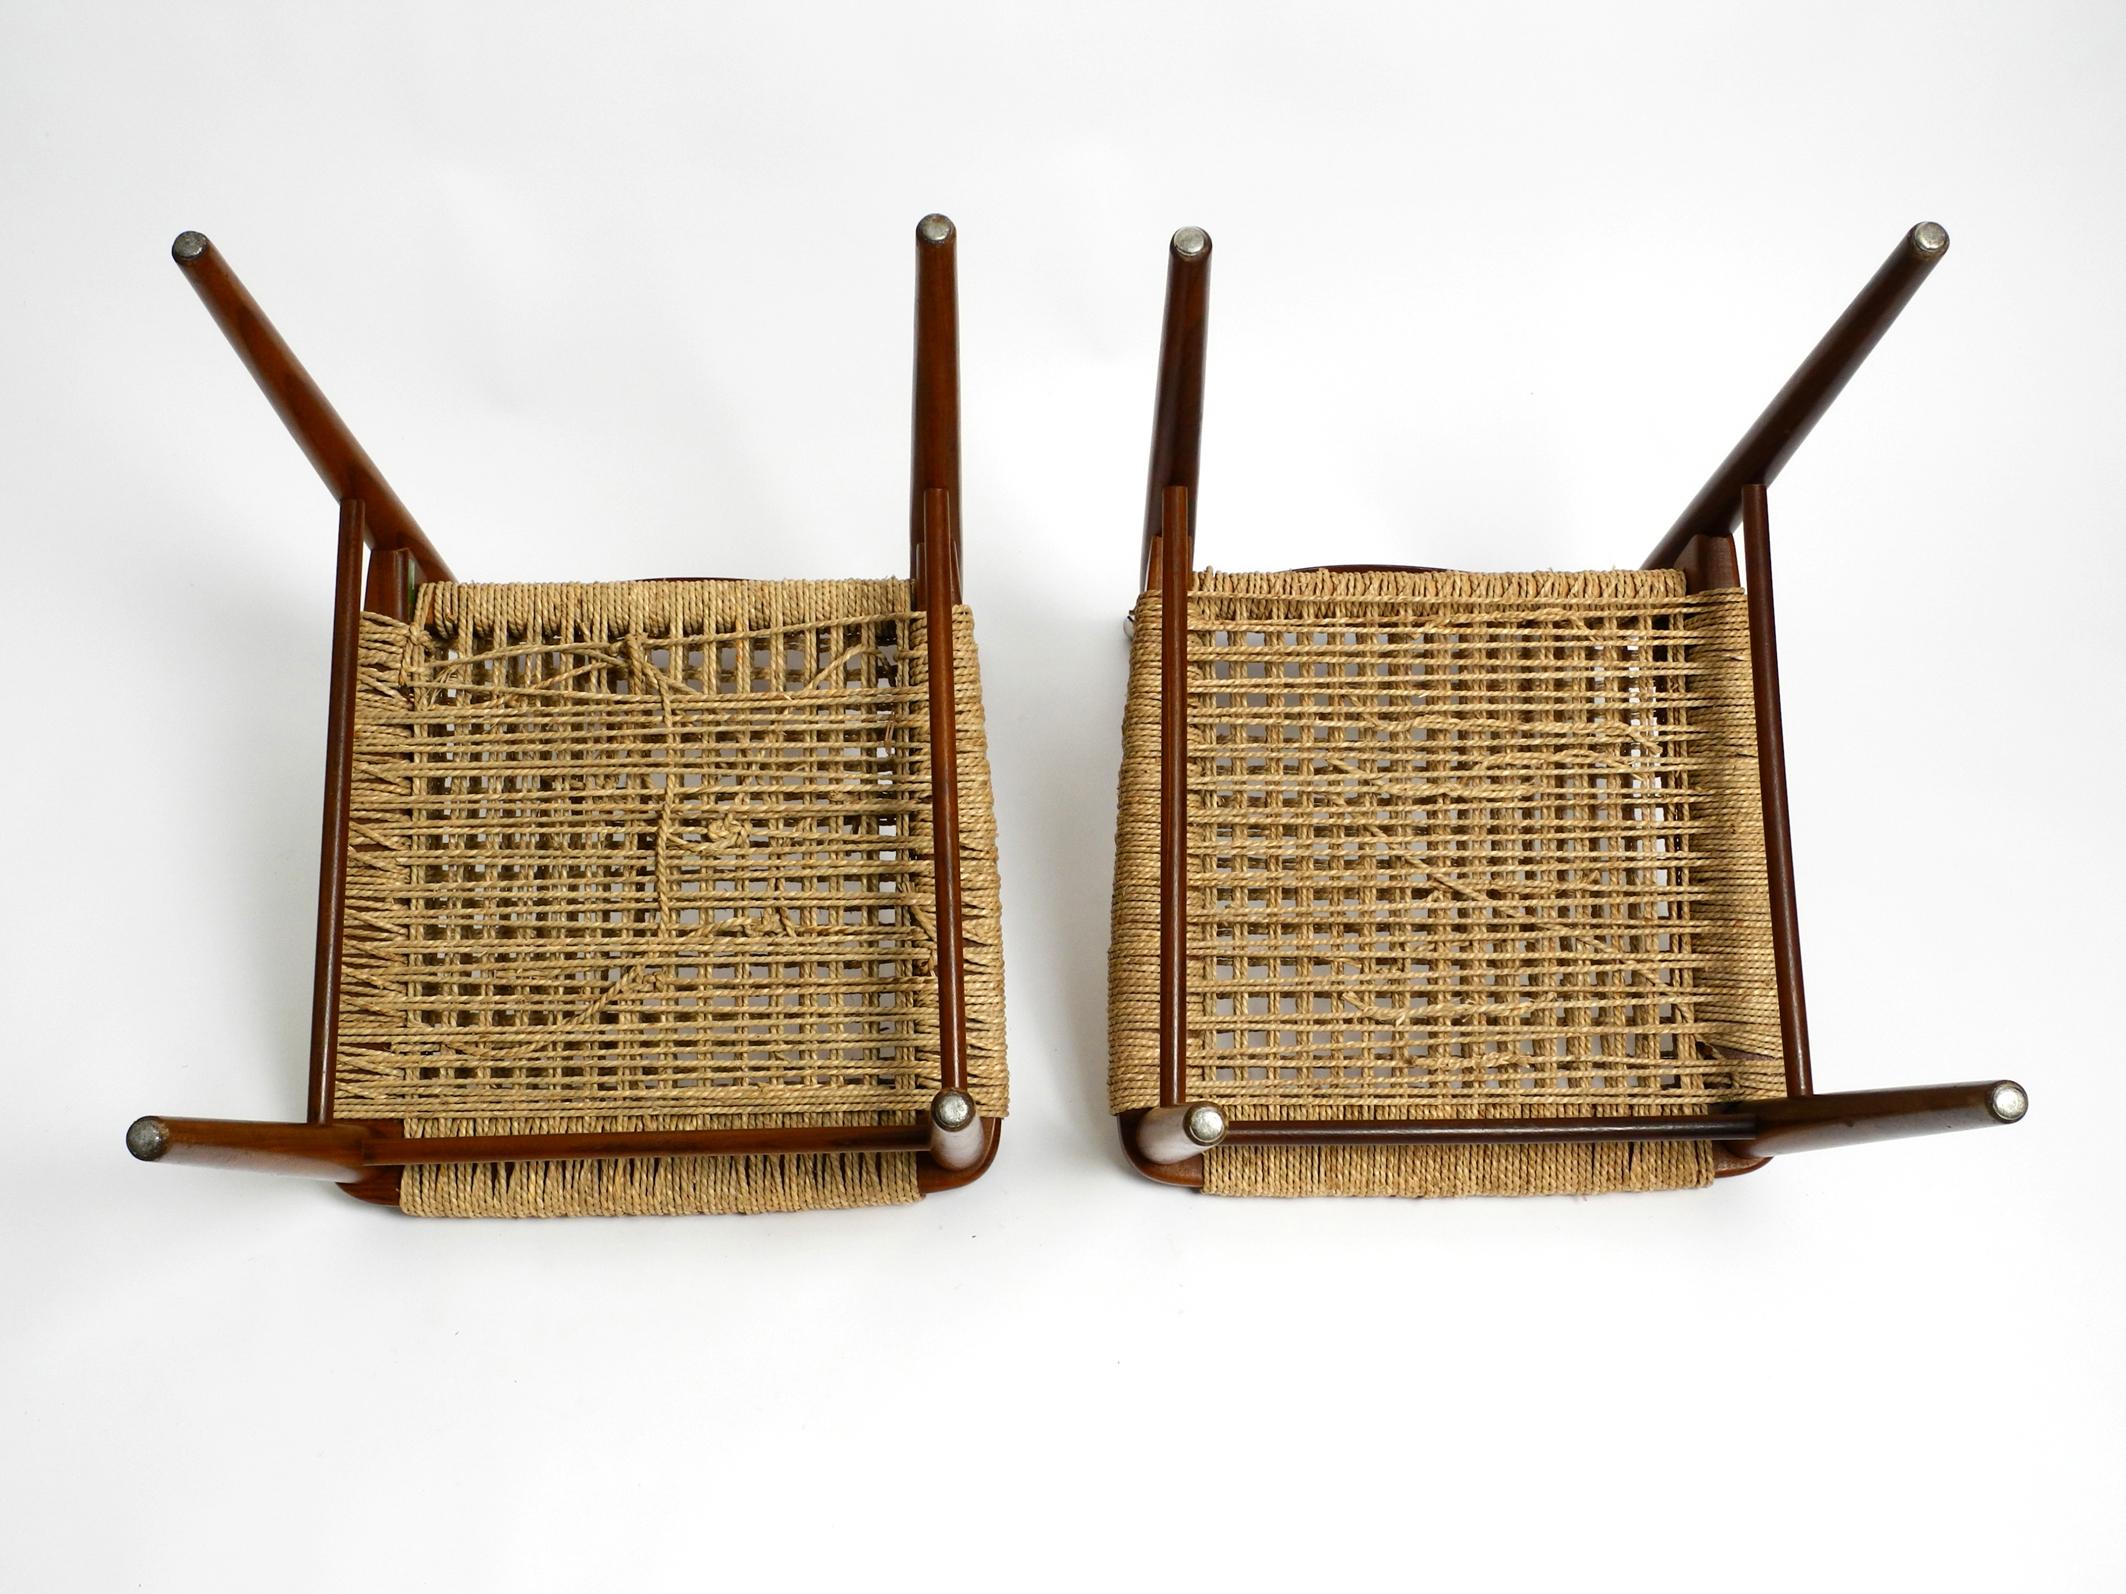 Two Original 1960s Wilkhahn Chairs Made of Walnut with Wicker Cane For Sale 2